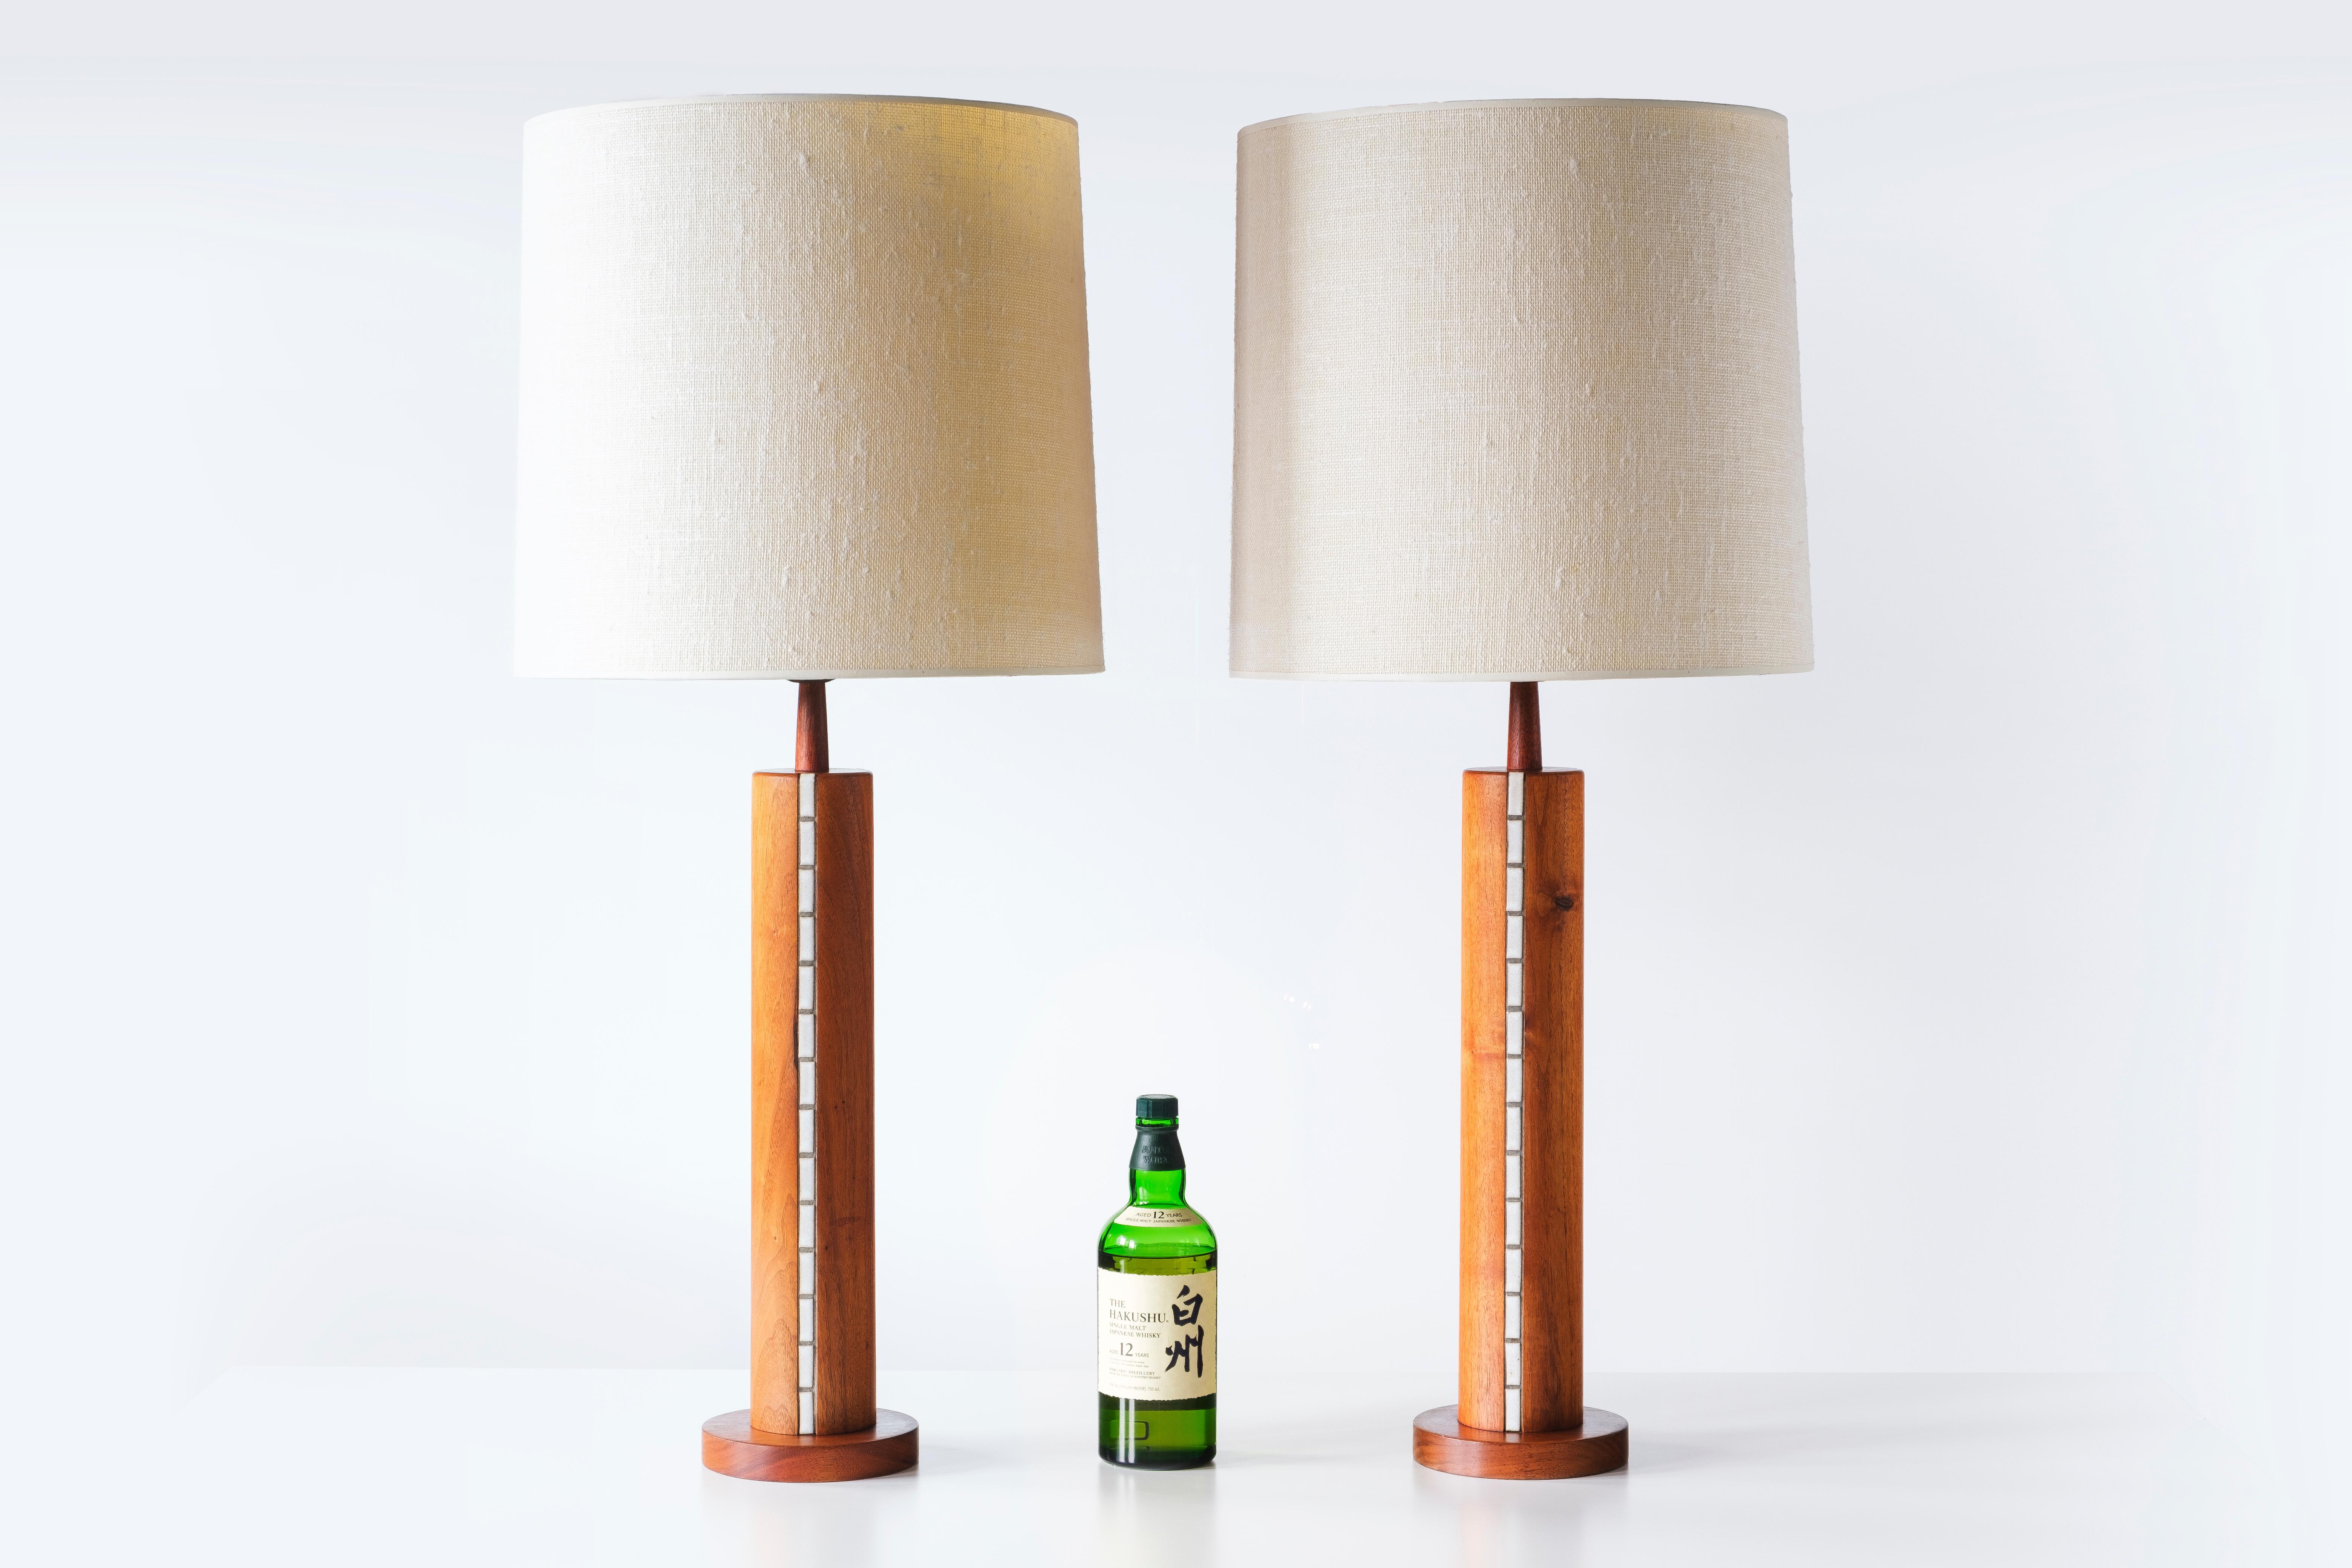 💡 What is it?
—
Another gem from the masters of mid century lightning – Gordon and Jane Martz. This substantial set of Martz lamps is comprised of a walnut base inlayed with white/gray thin, rectangular ceramic tiles. The pattern appears in three